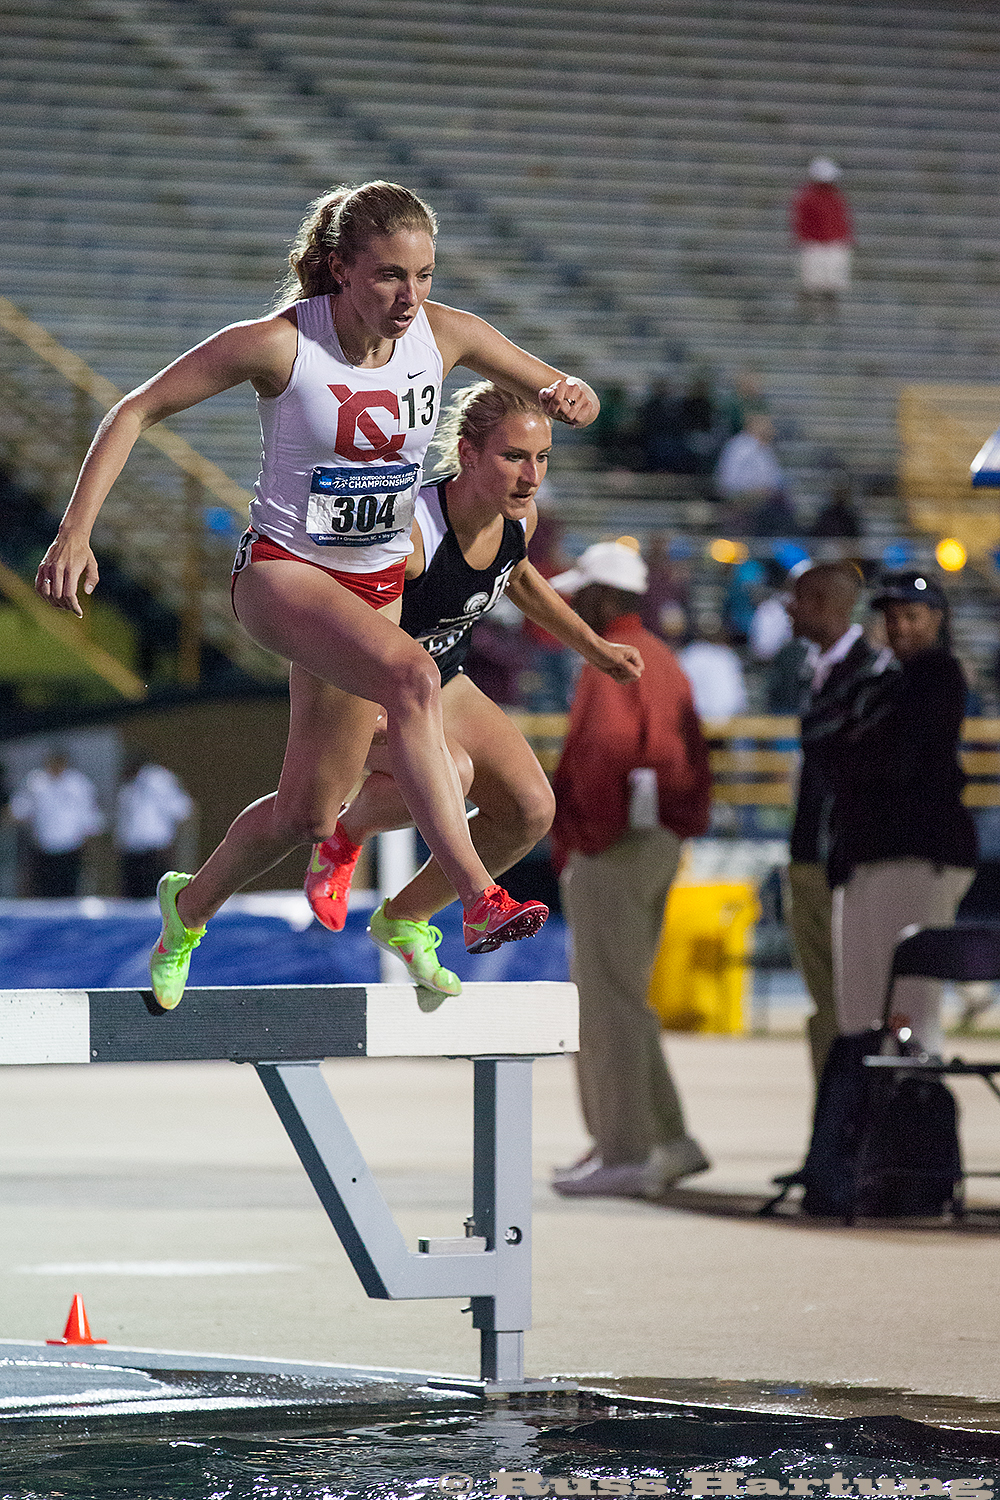 Genna Hartung competing in the steeplechase at the 2013 NCAA Division 1 Regional Championships in Greensboro, South Carolina.  